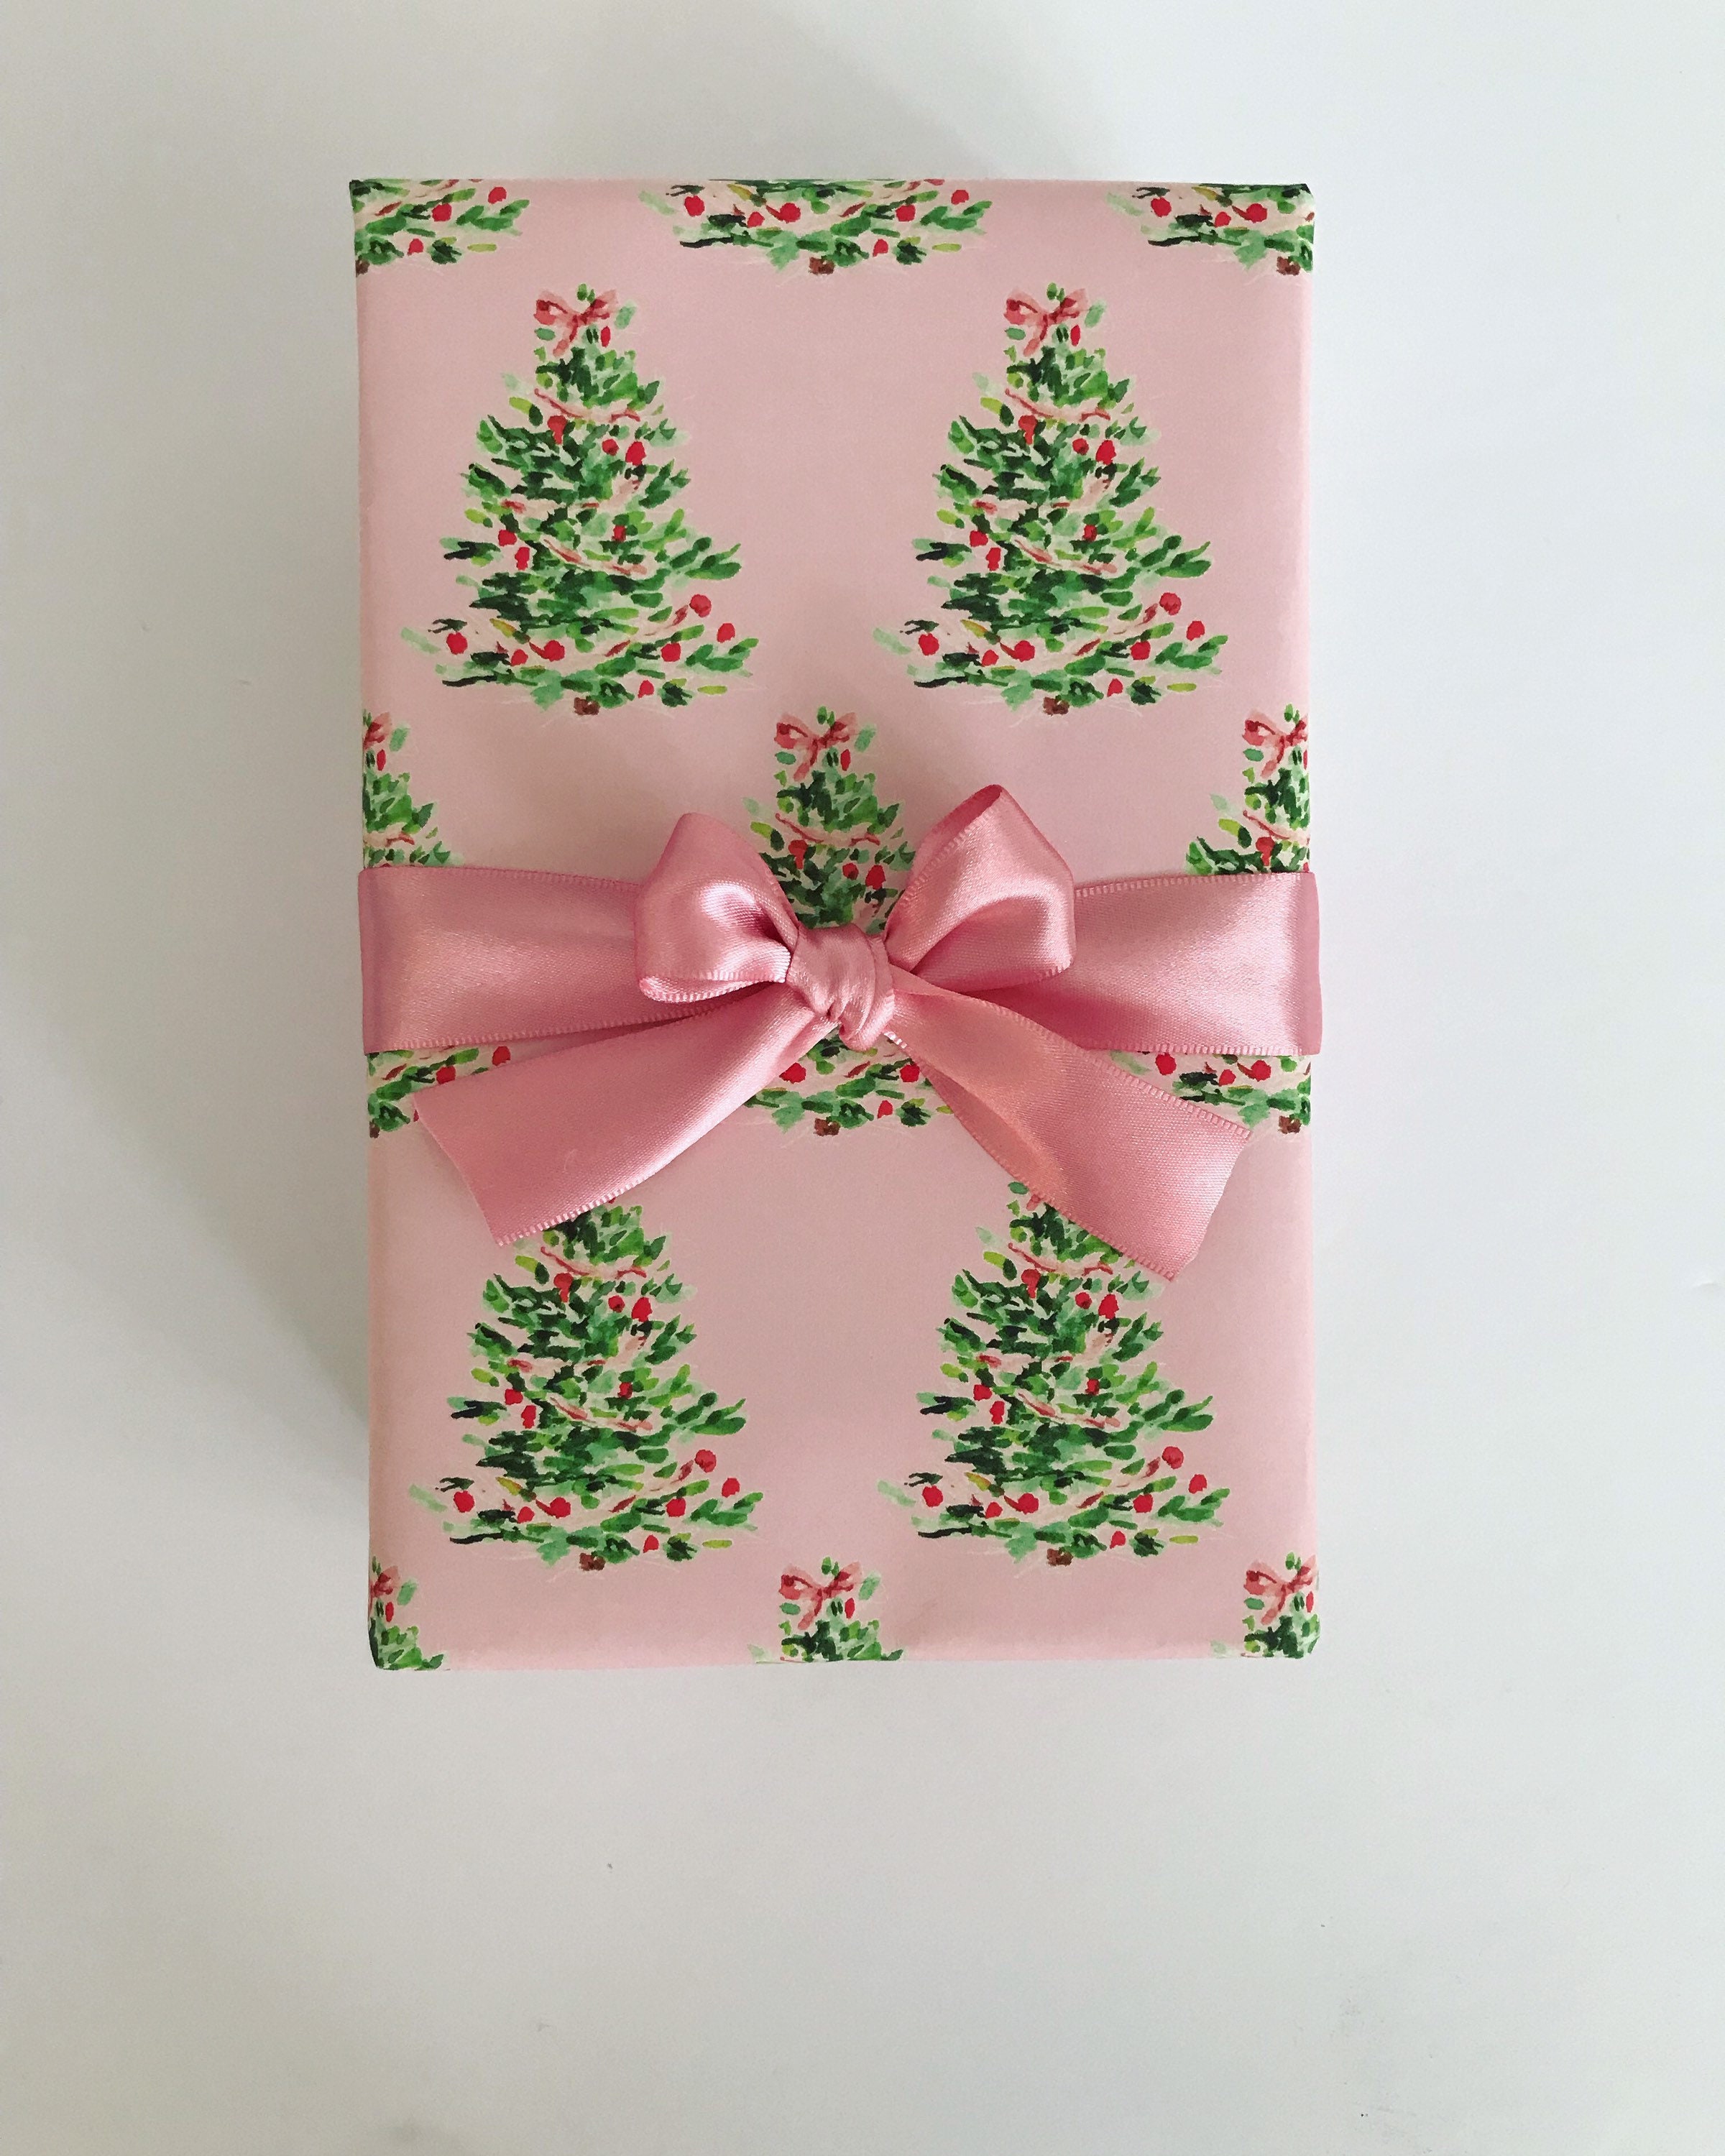 Wrapping Paper: Oh Christmas Tree Pink {Gift Wrap, Birthday, Holiday, Christmas}